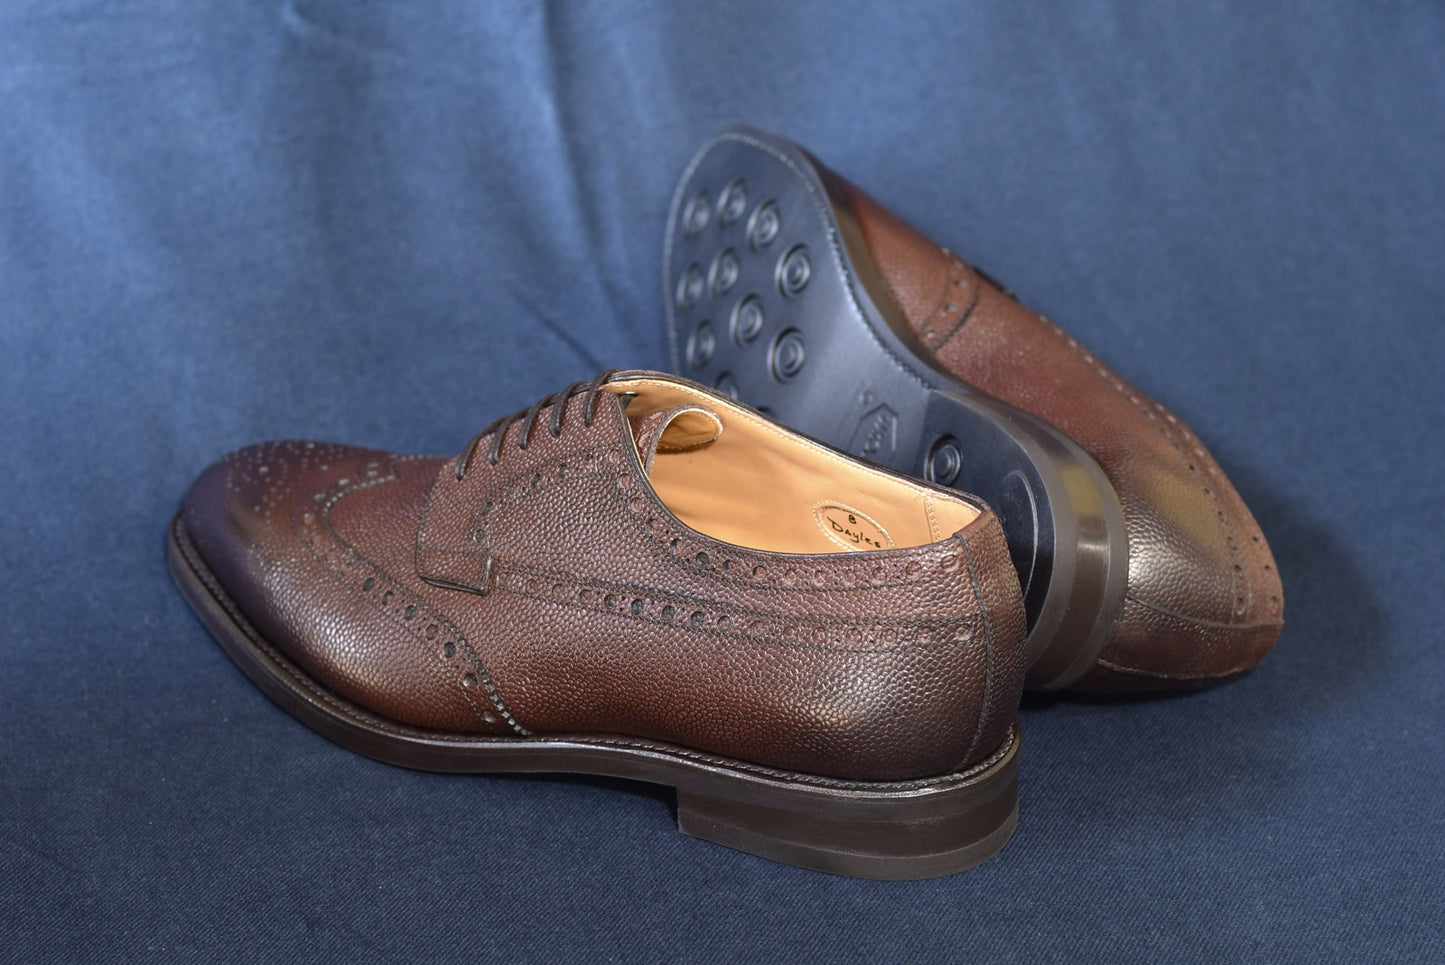 “Dayles” Full brogue, Dark Brown with Antique Finish Dress Shoes, Grained Leather, Goodyear welted, US size 5 1/2 ~ 10